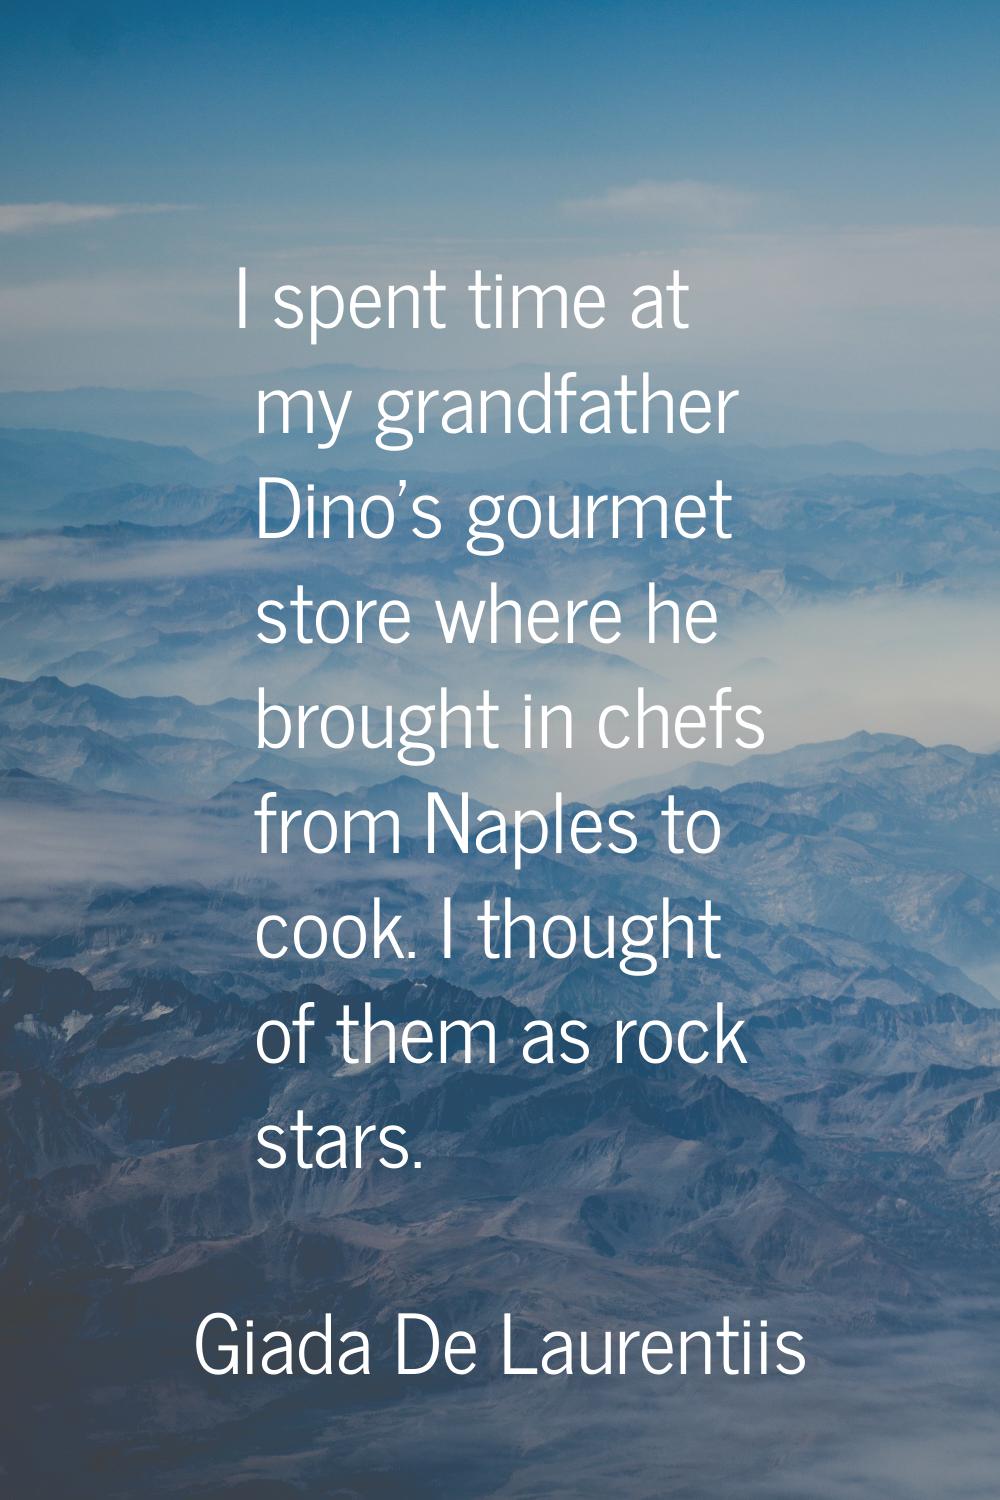 I spent time at my grandfather Dino's gourmet store where he brought in chefs from Naples to cook. 